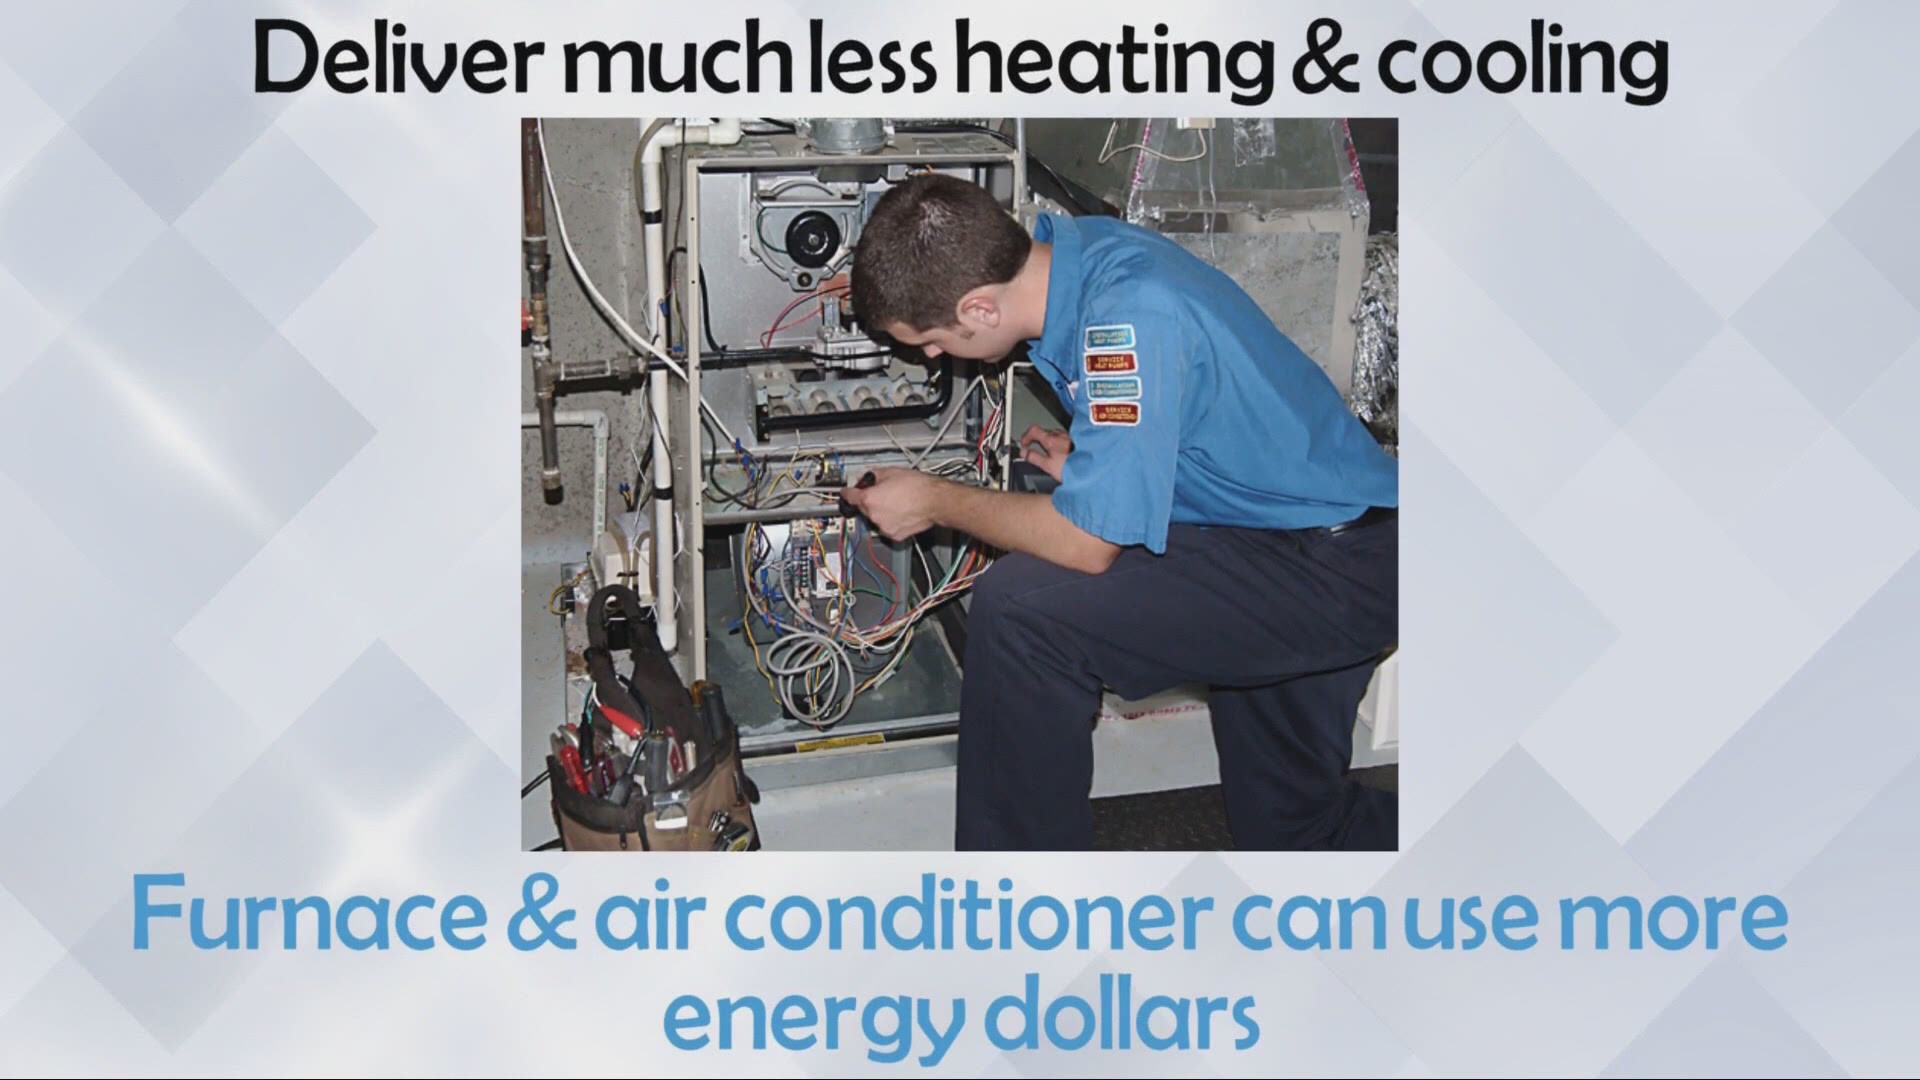 Energy efficient solutions to keep you cool this summer. This segment was paid for by Big Mountain Heating & Air.